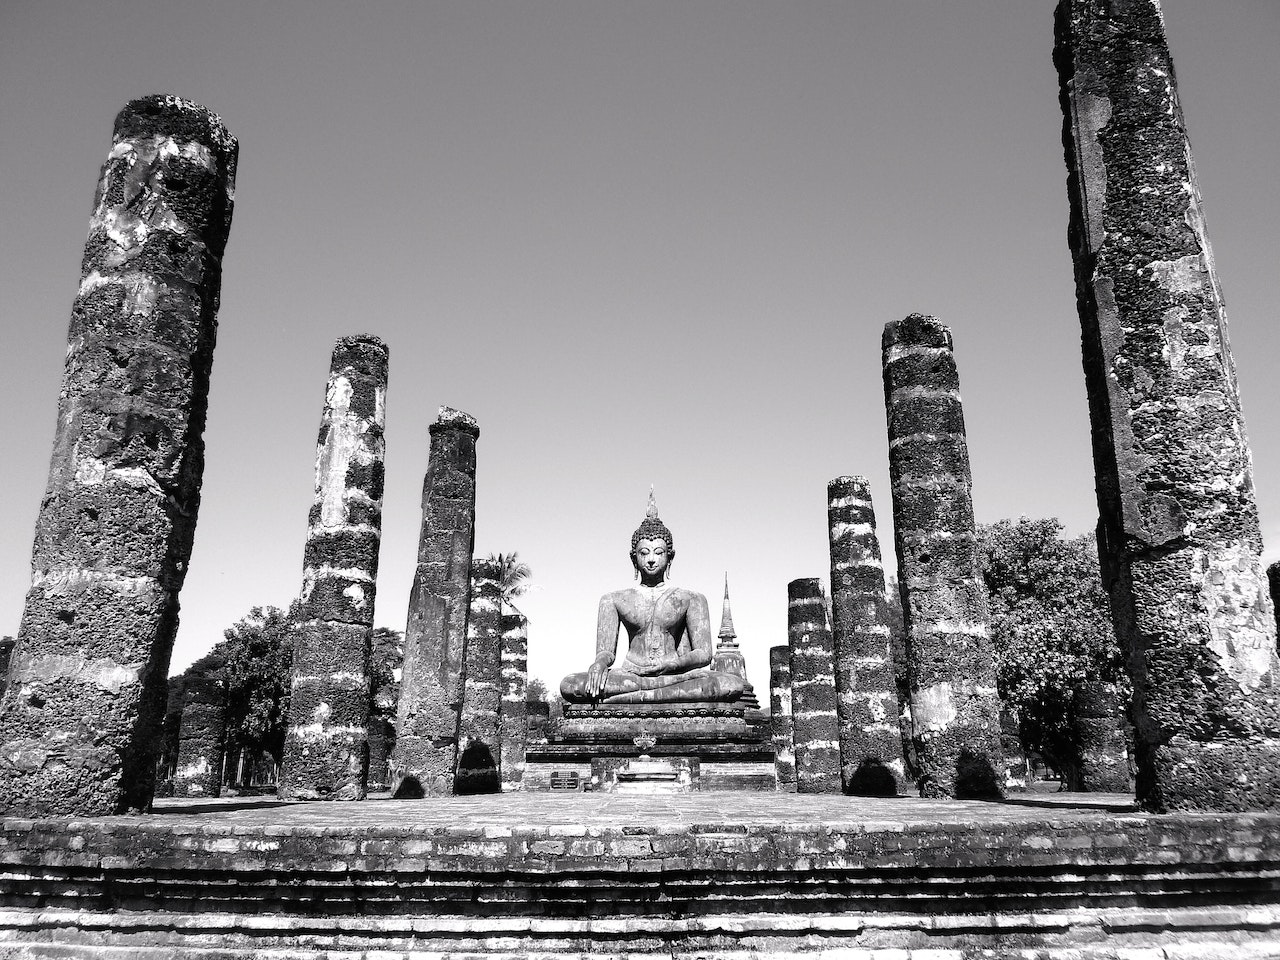 Greyscale picture of a Buddha statue